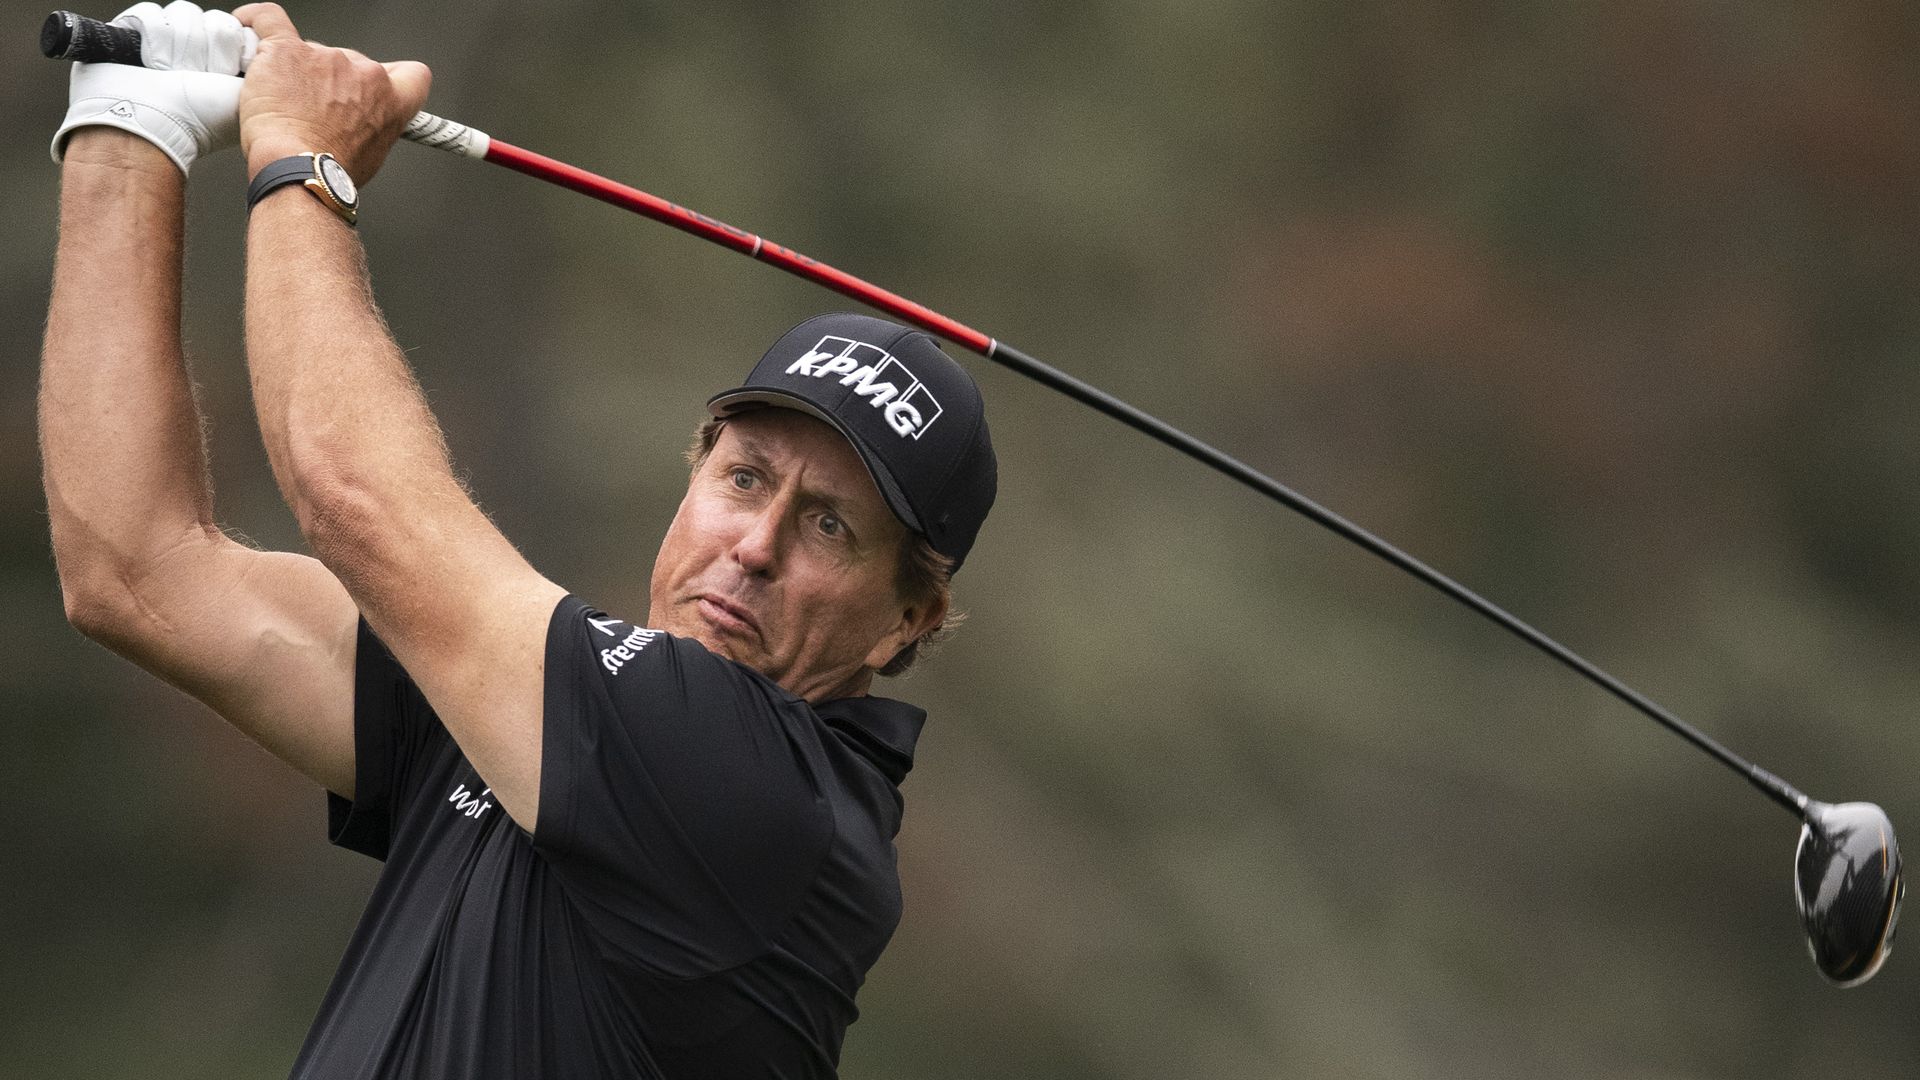 Phil Mickelson during round one of the Safeway Open golf tournament in Napa, California, on Sept. 10.